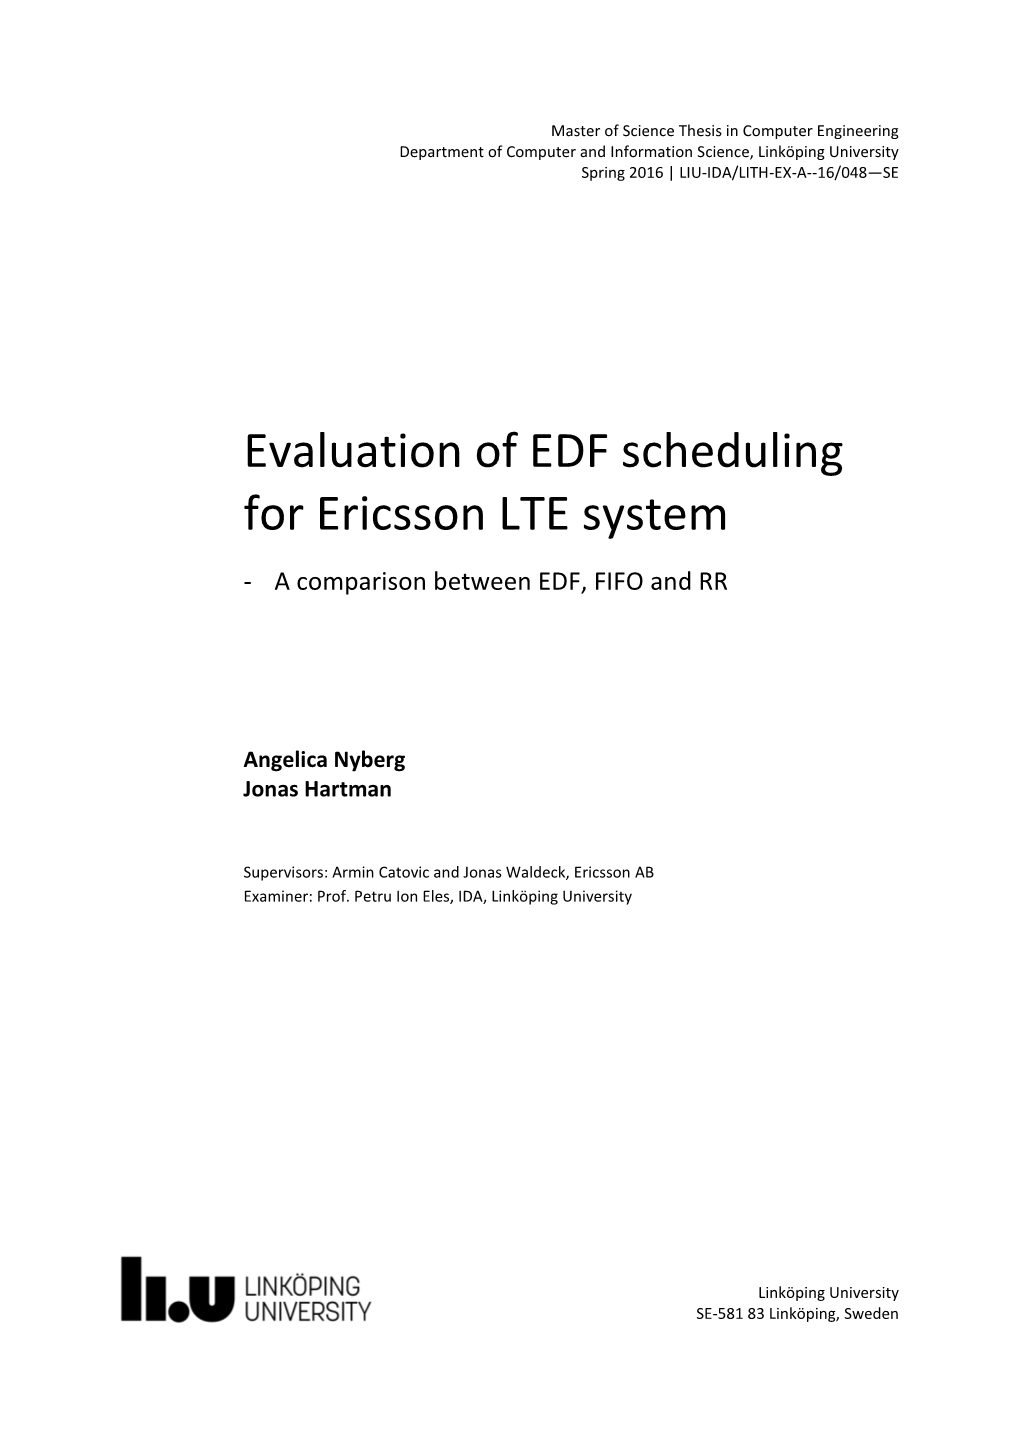 Evaluation of EDF Scheduling for Ericsson LTE System - a Comparison Between EDF, FIFO and RR